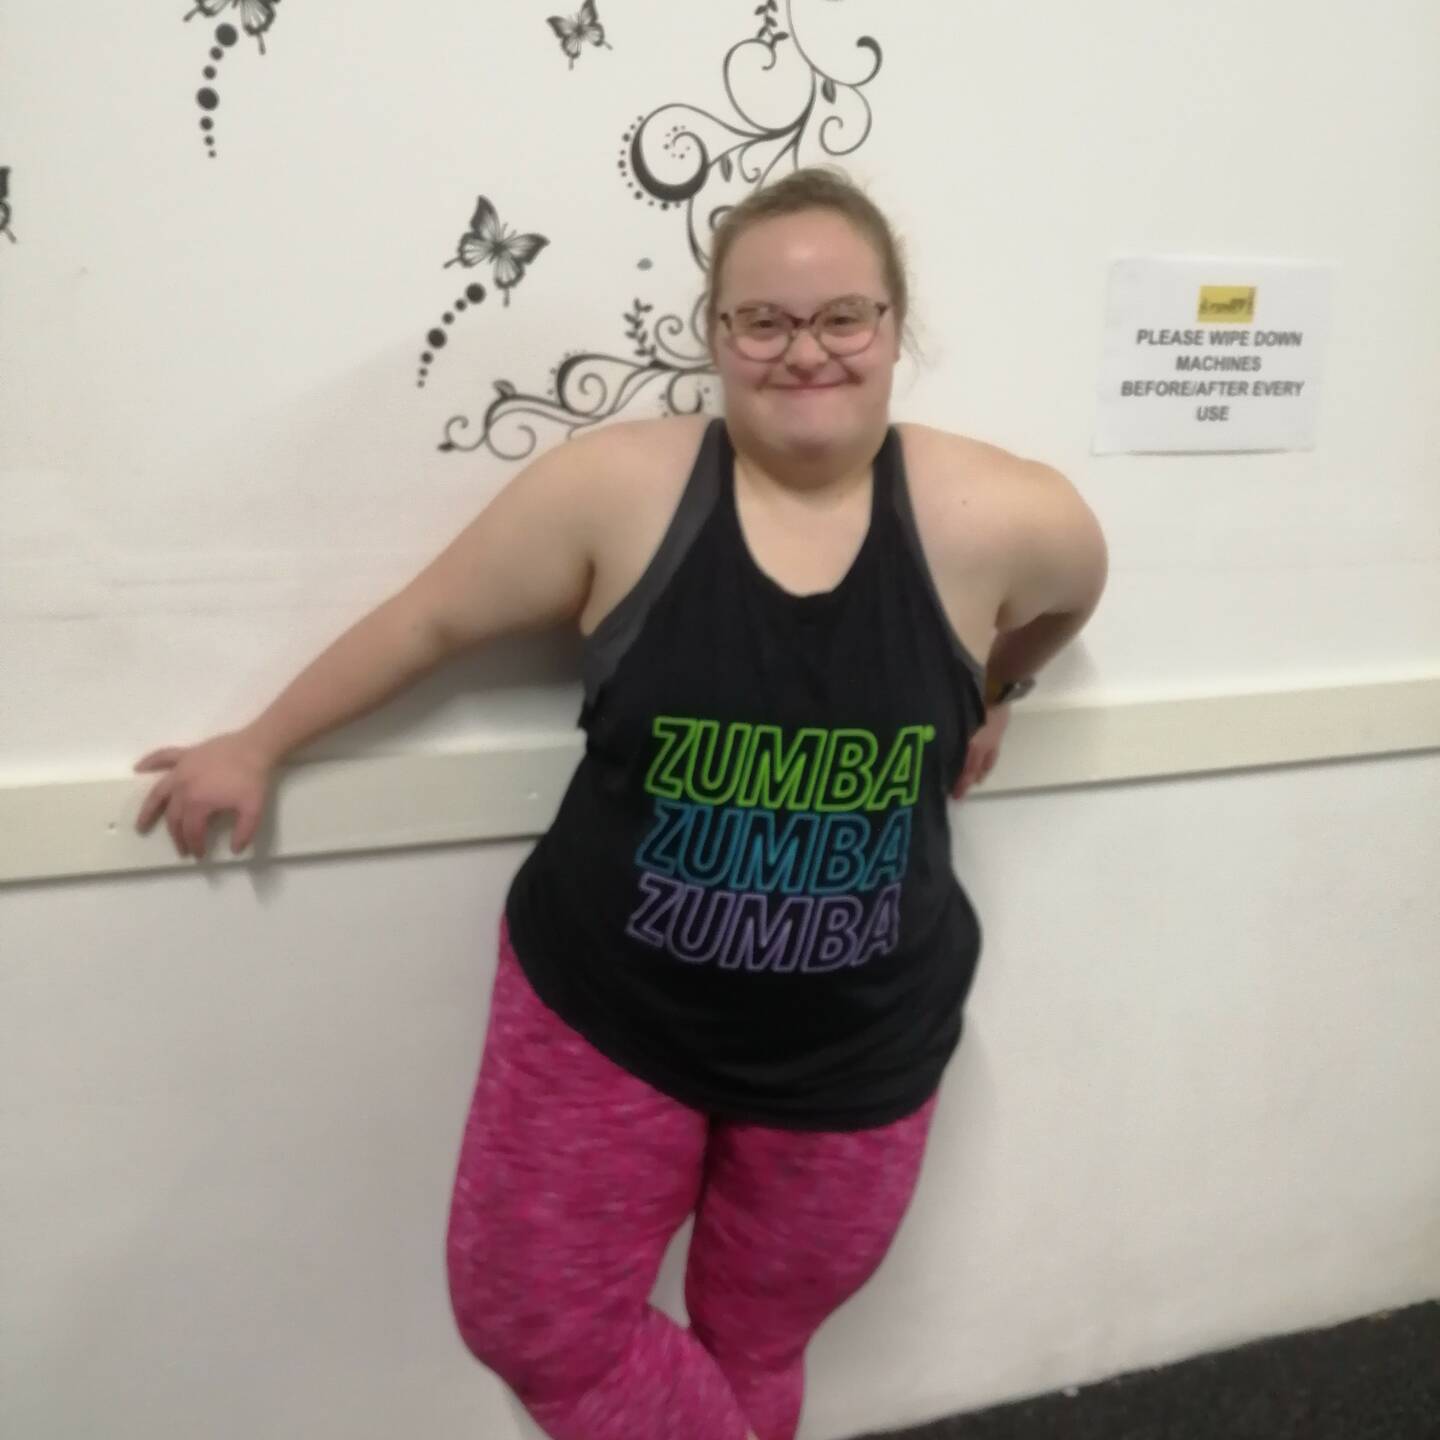 Hannah in her Zumba outfit